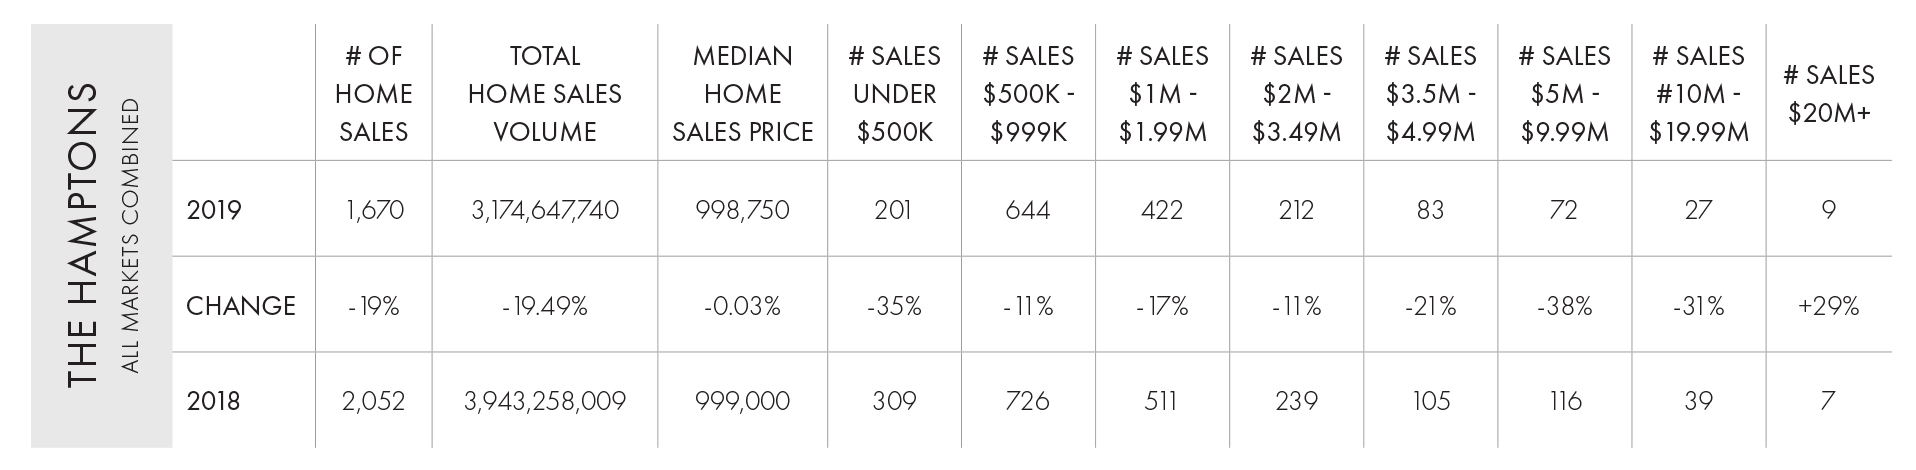 Hamptons Year End 2019 Home Sales Chart